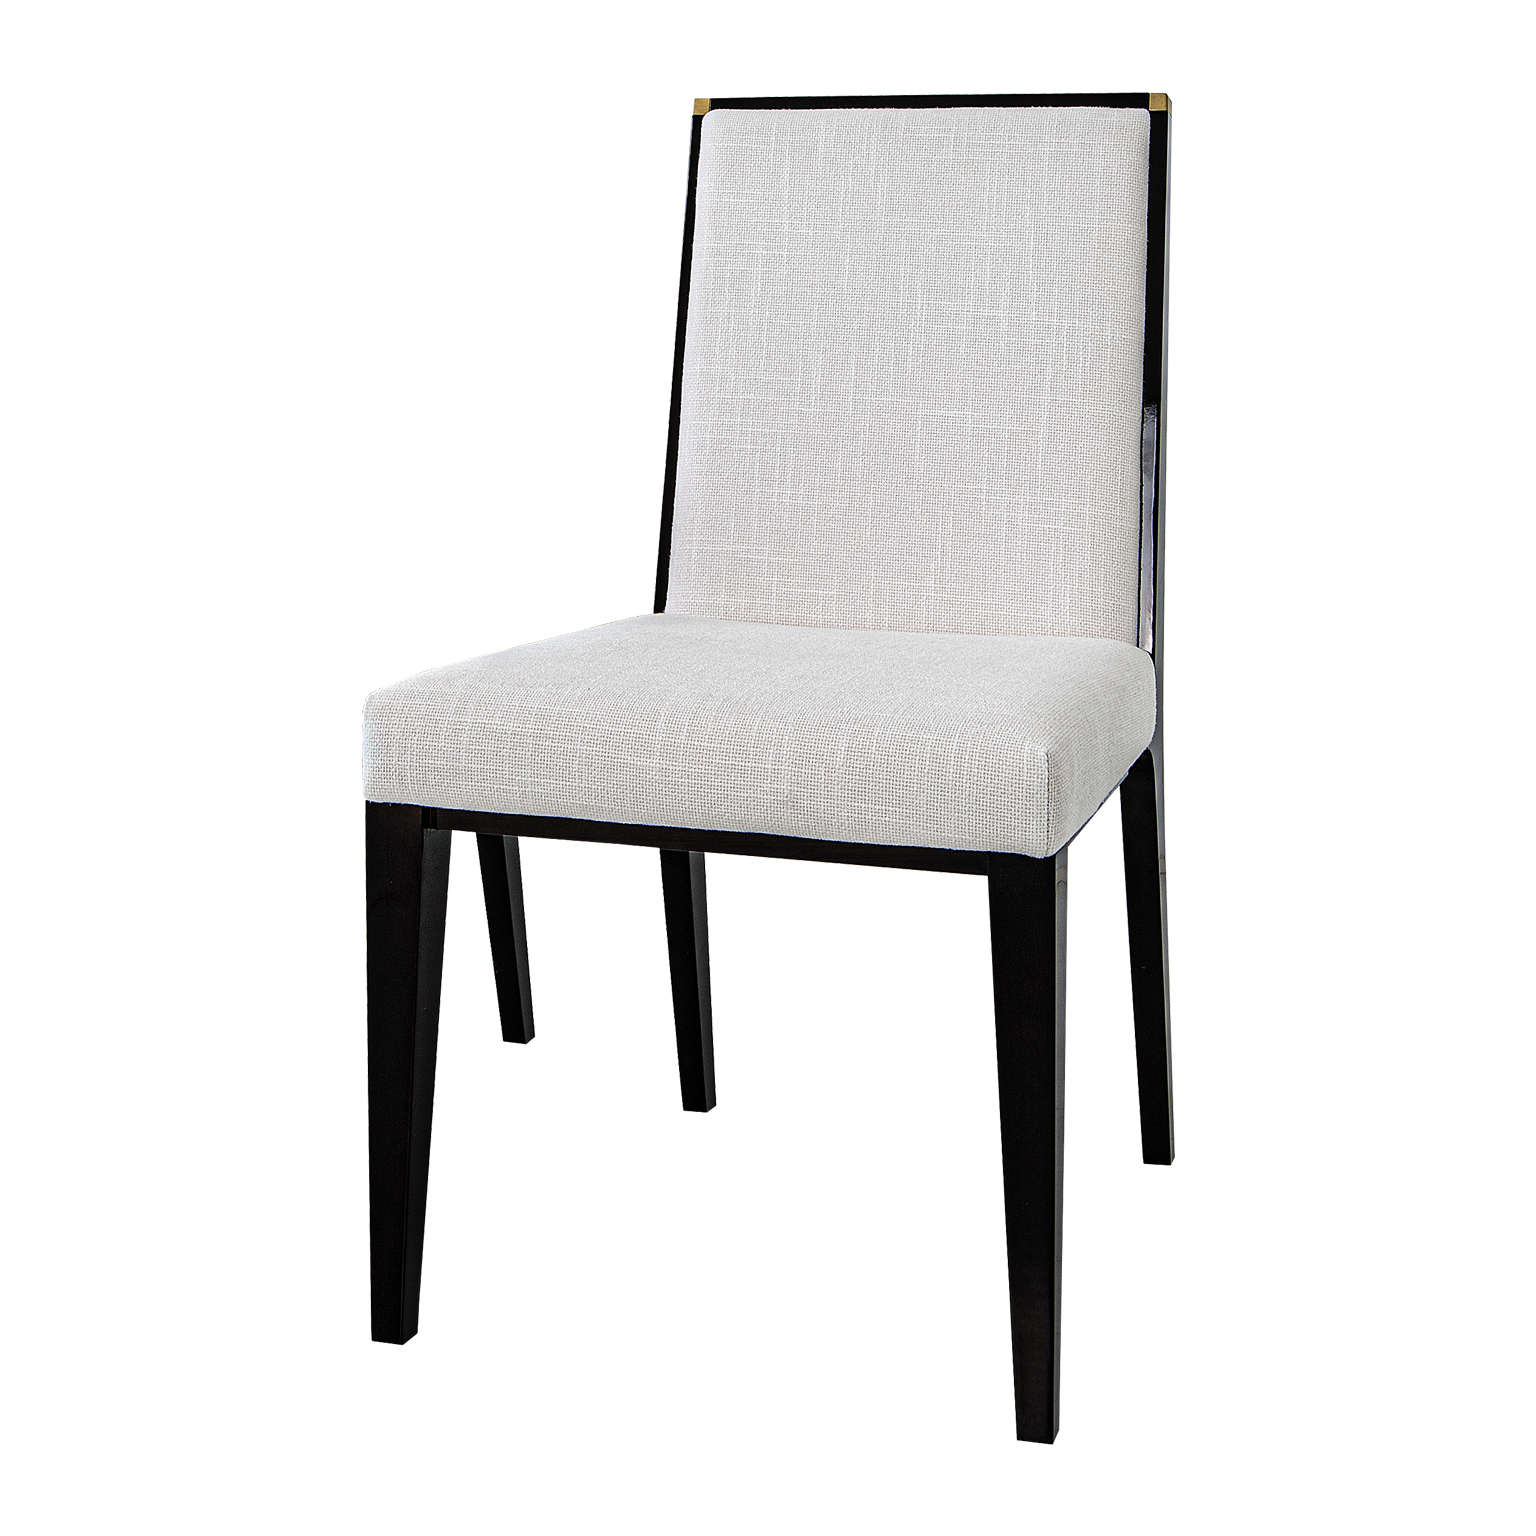 Oxford Dining chair without arm, with dark lacquer frame and smoked brass details